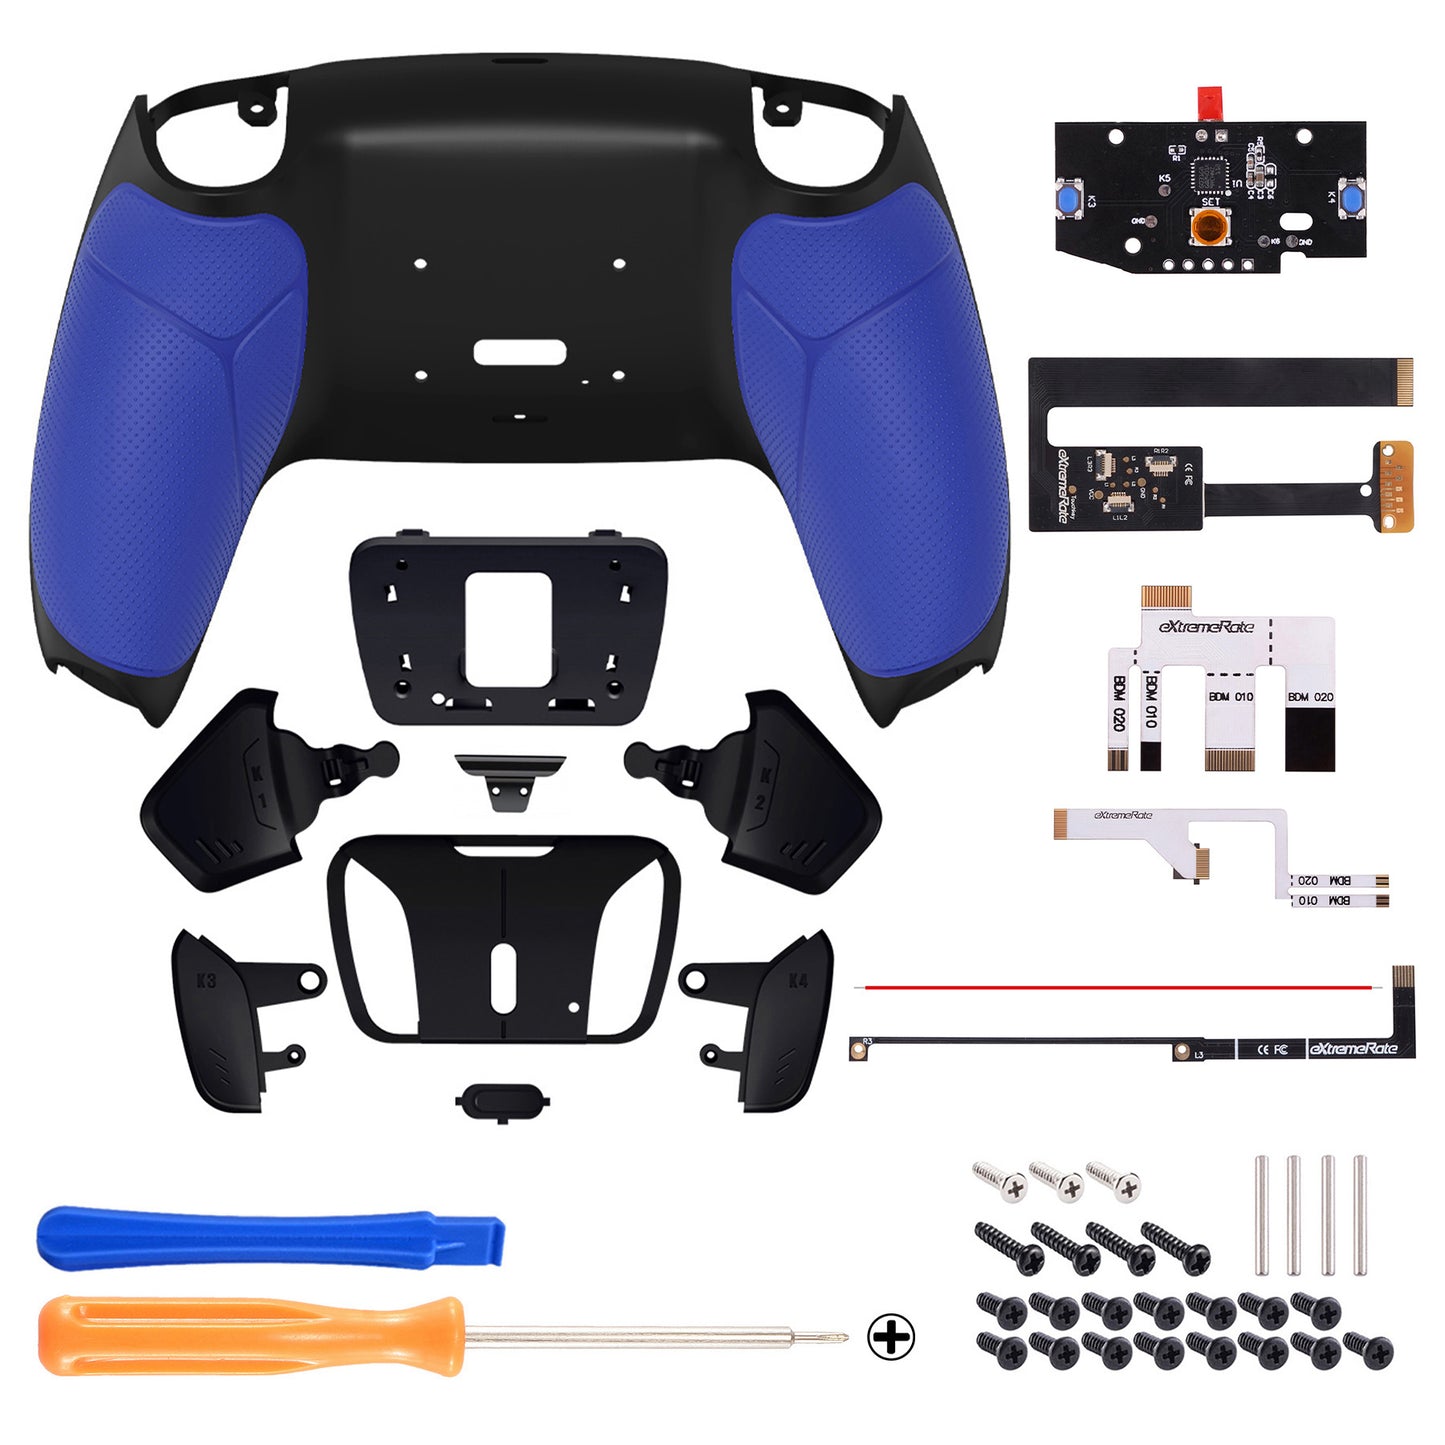 eXtremeRate Remappable RISE 4.0 Remap Kit for PS5 Controller BDM-010/020 - Rubberized Blue eXtremeRate